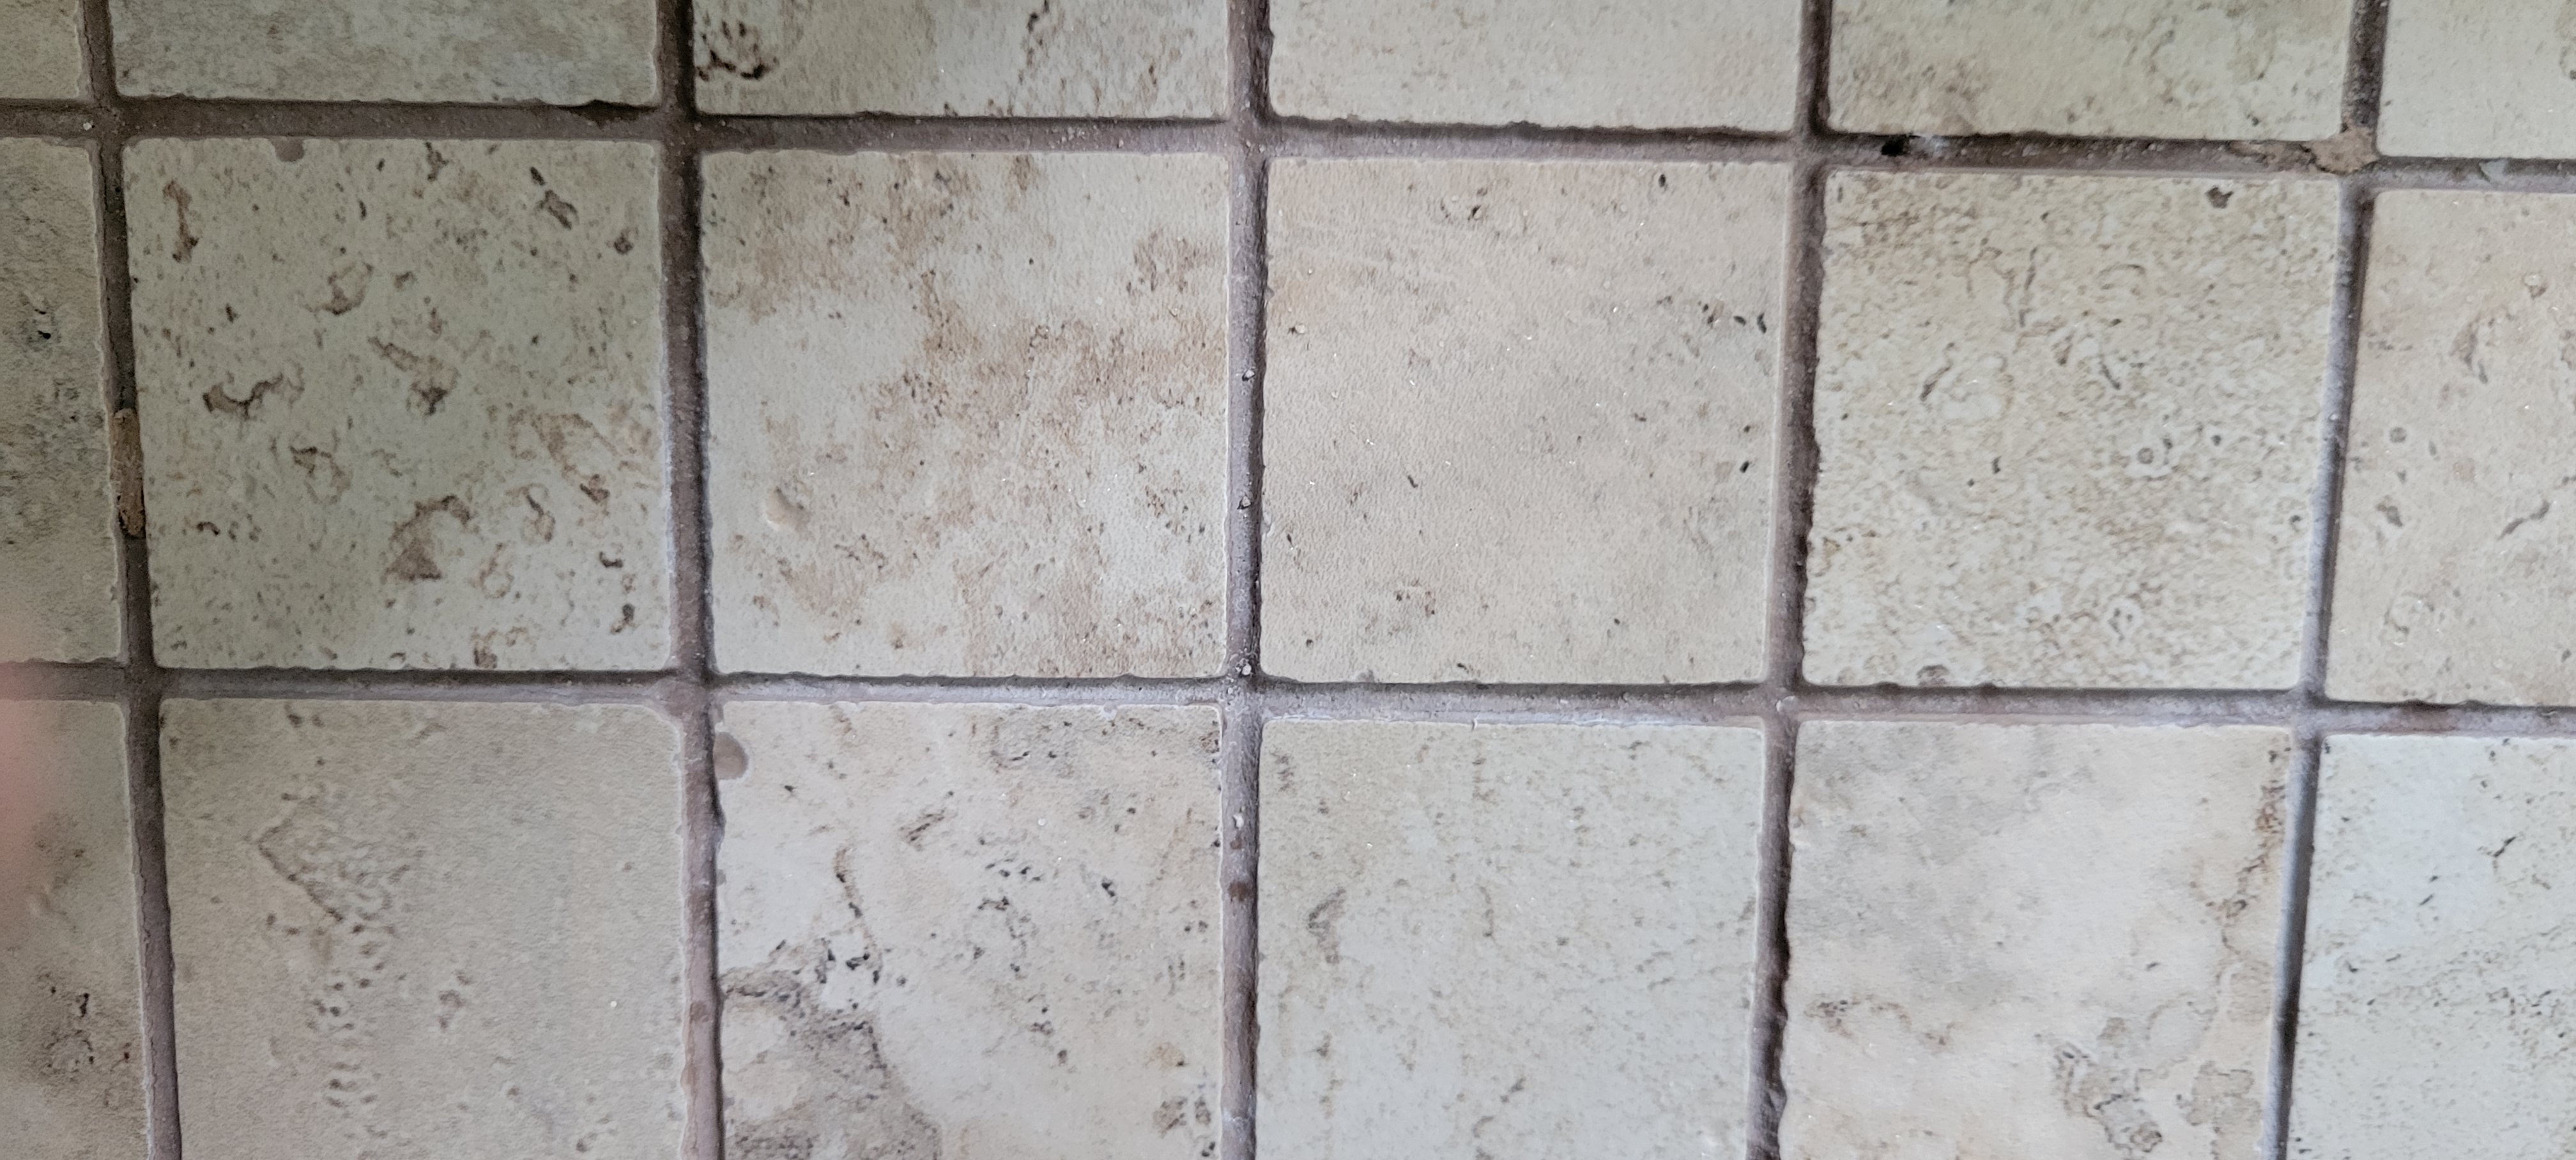 No grout or low grout between each tile